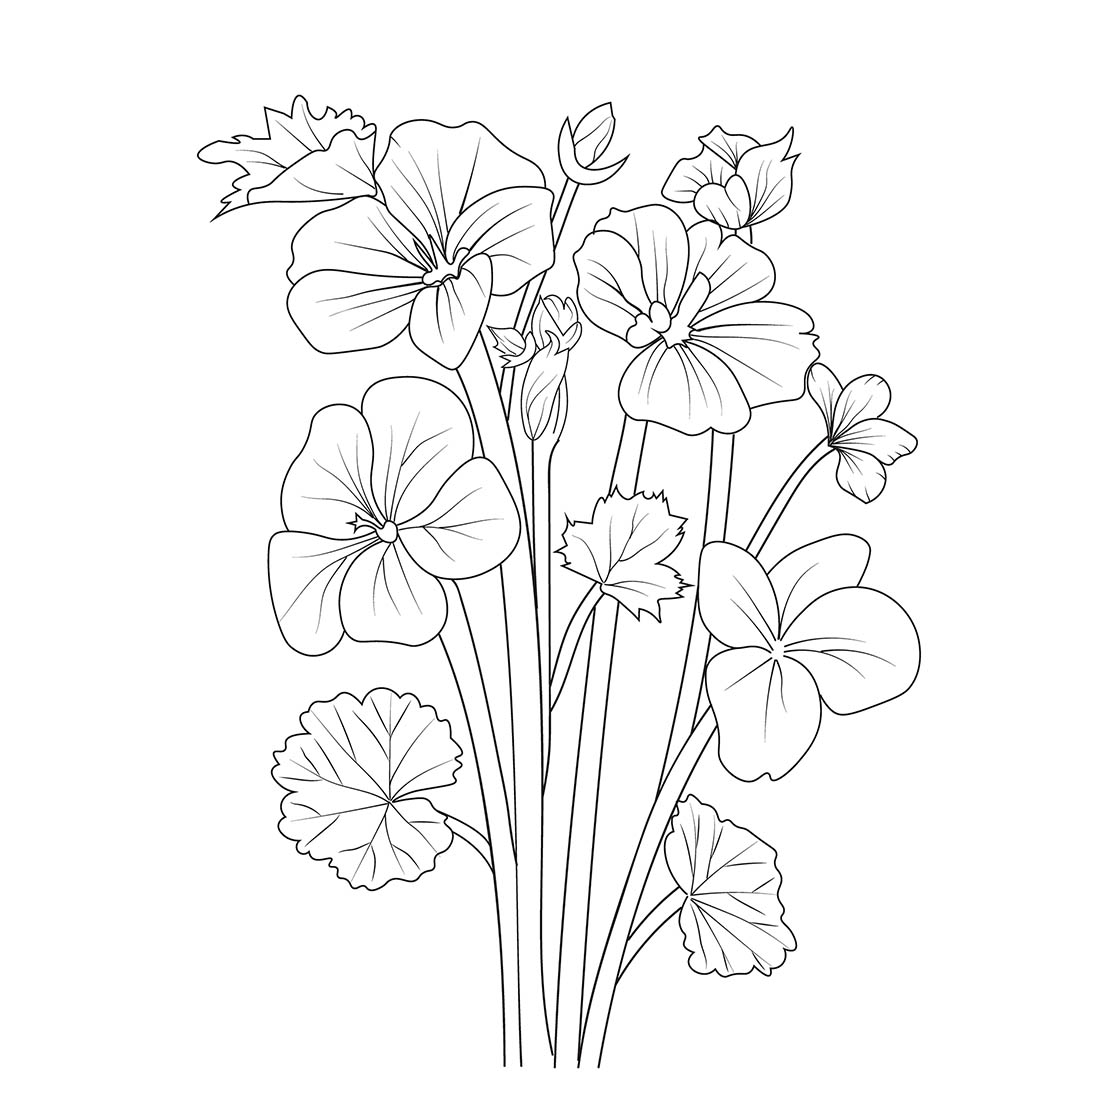 February birth flower, February primrose birth flower, February birth primrose drawings, primula flower drawing preview image.